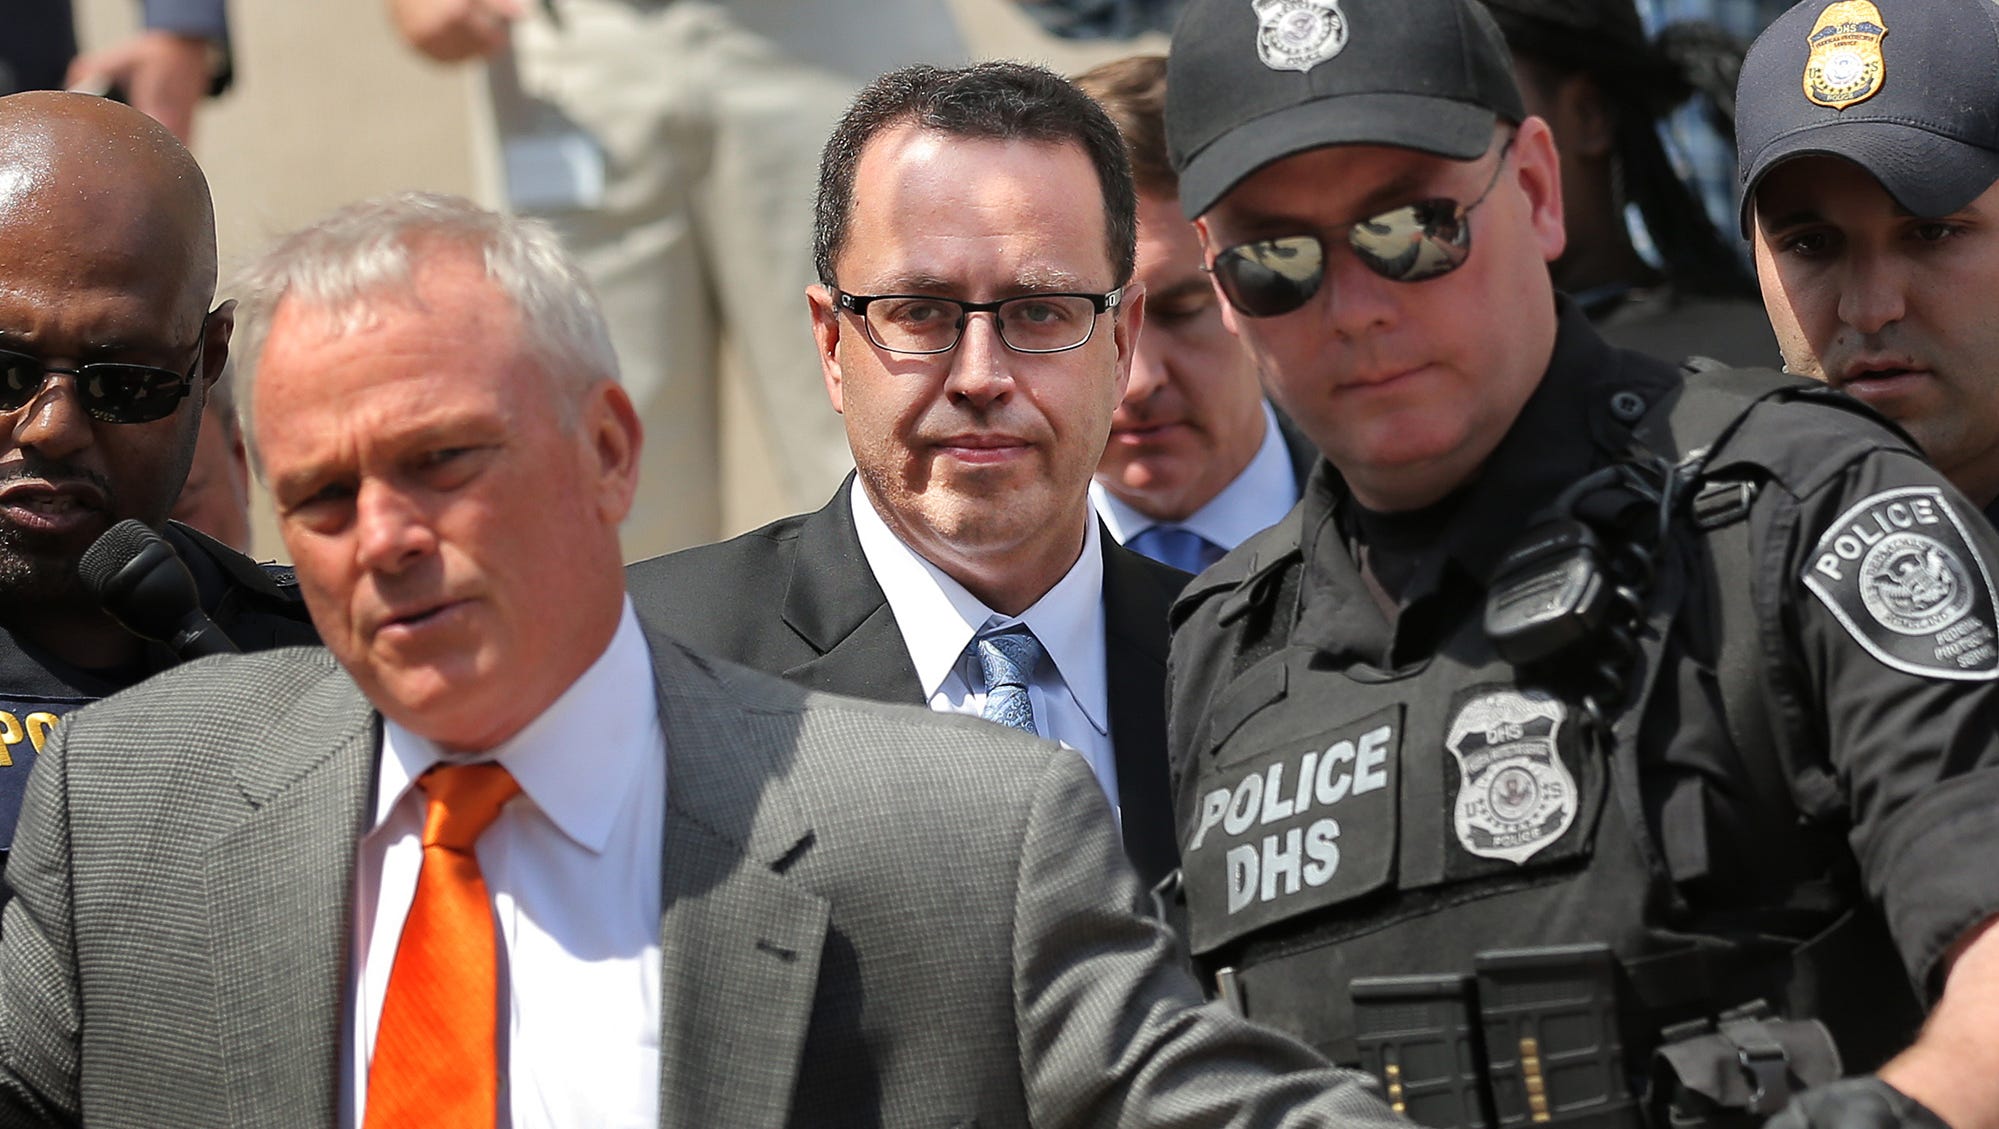 Jared Fogle sought out teen sex, child porn